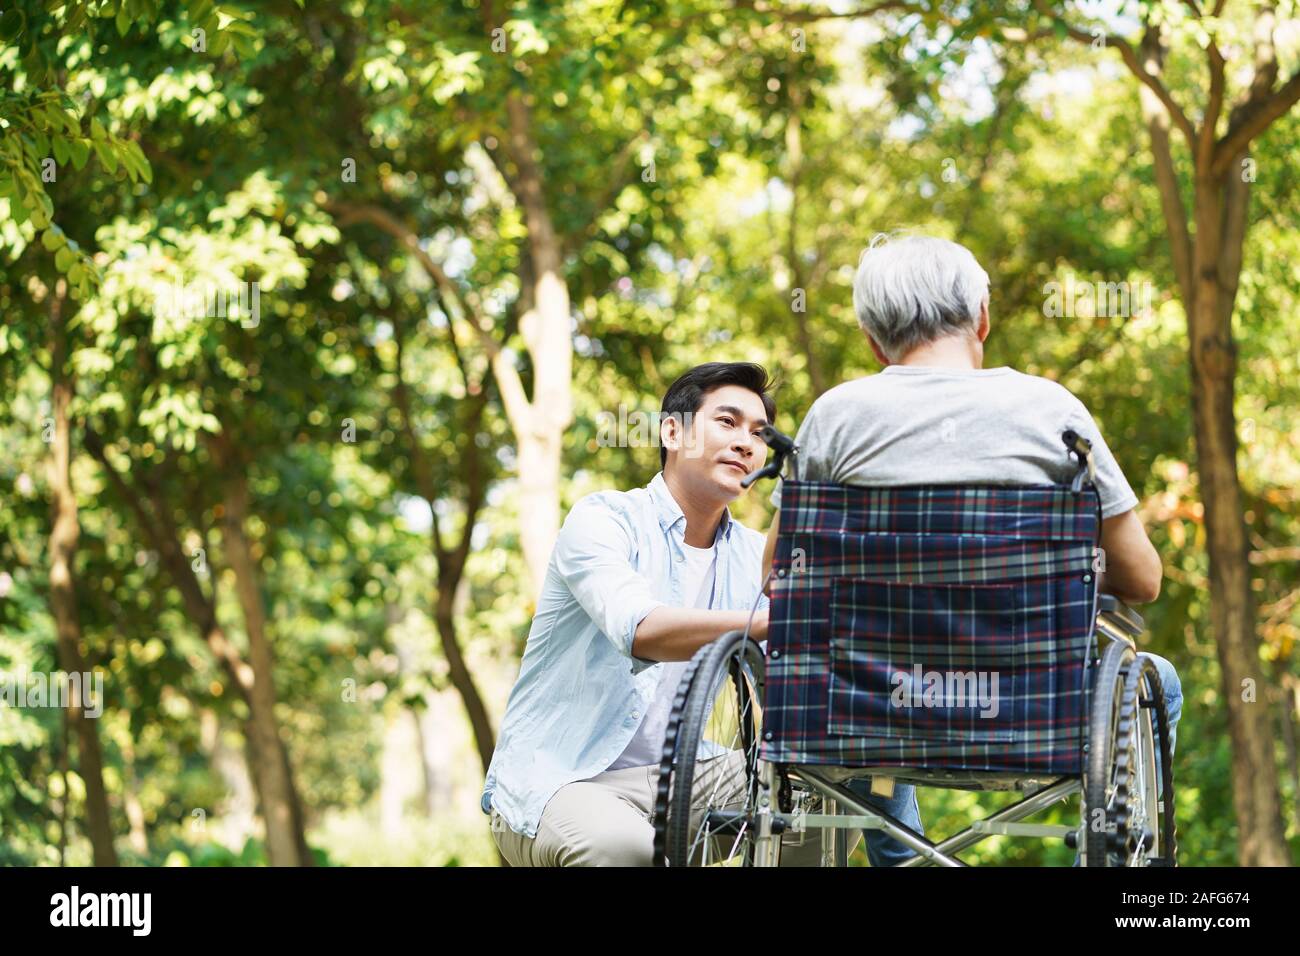 young asian adult son consoling wheelchair bound father outdoors in park Stock Photo